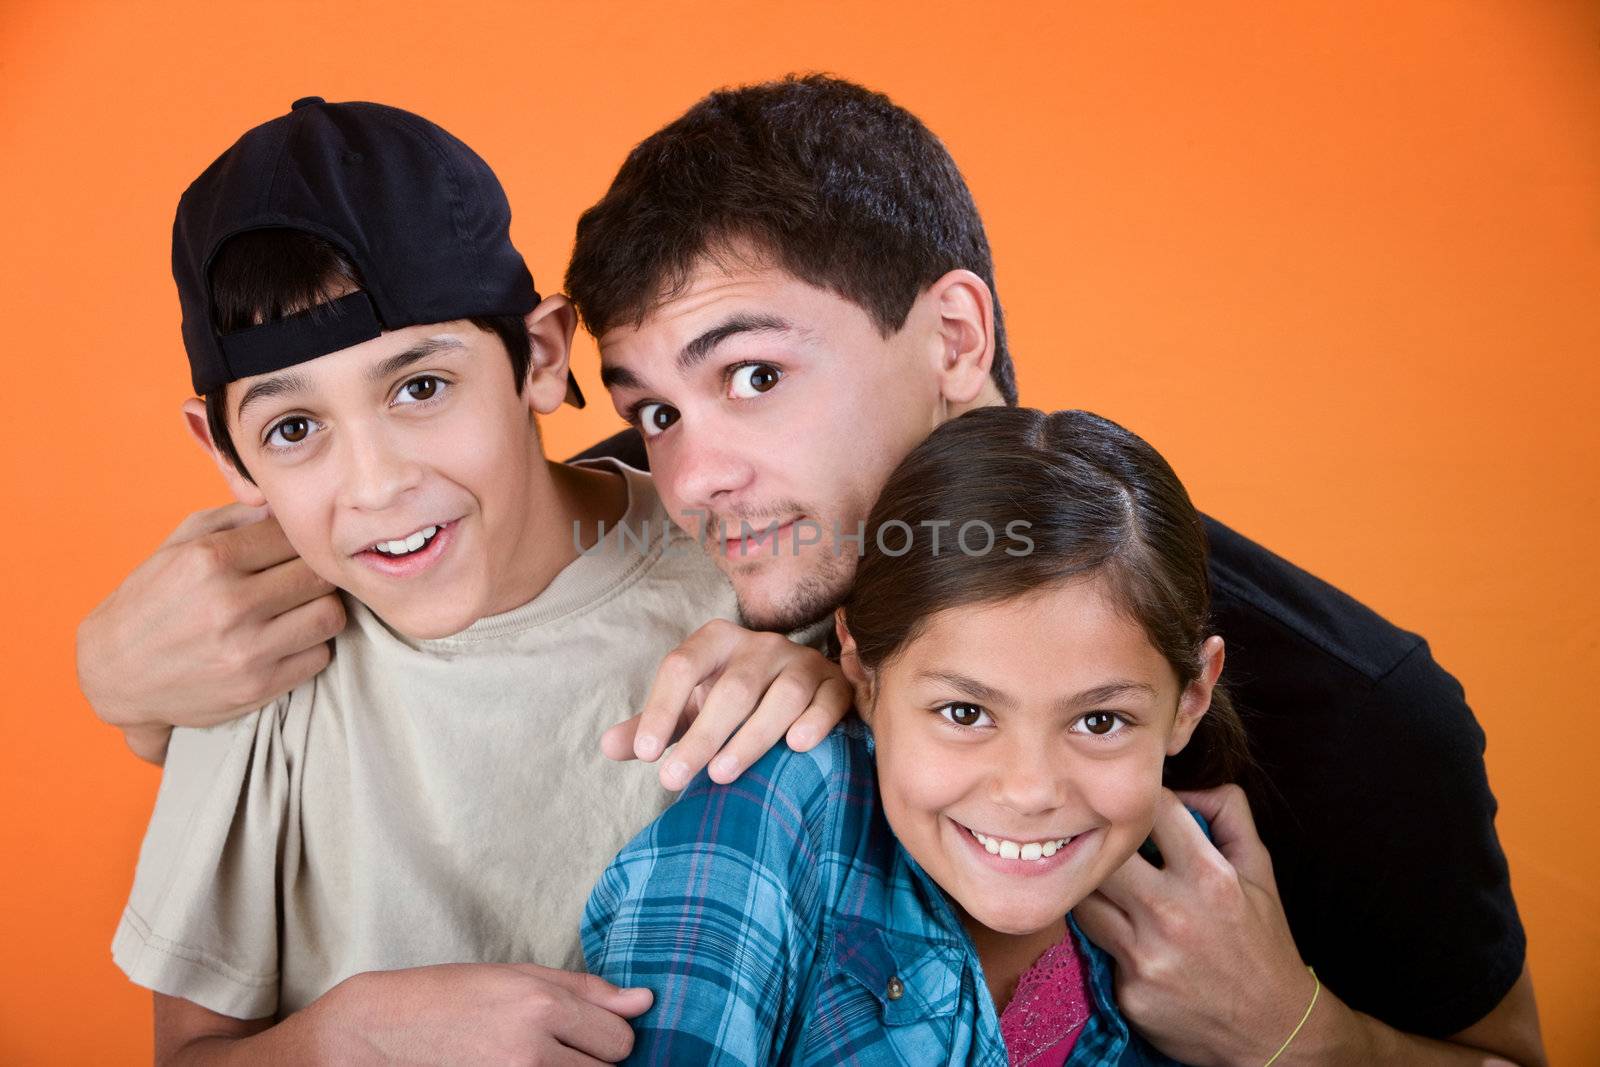 Teen holding and playing with brother and sister on an orange background